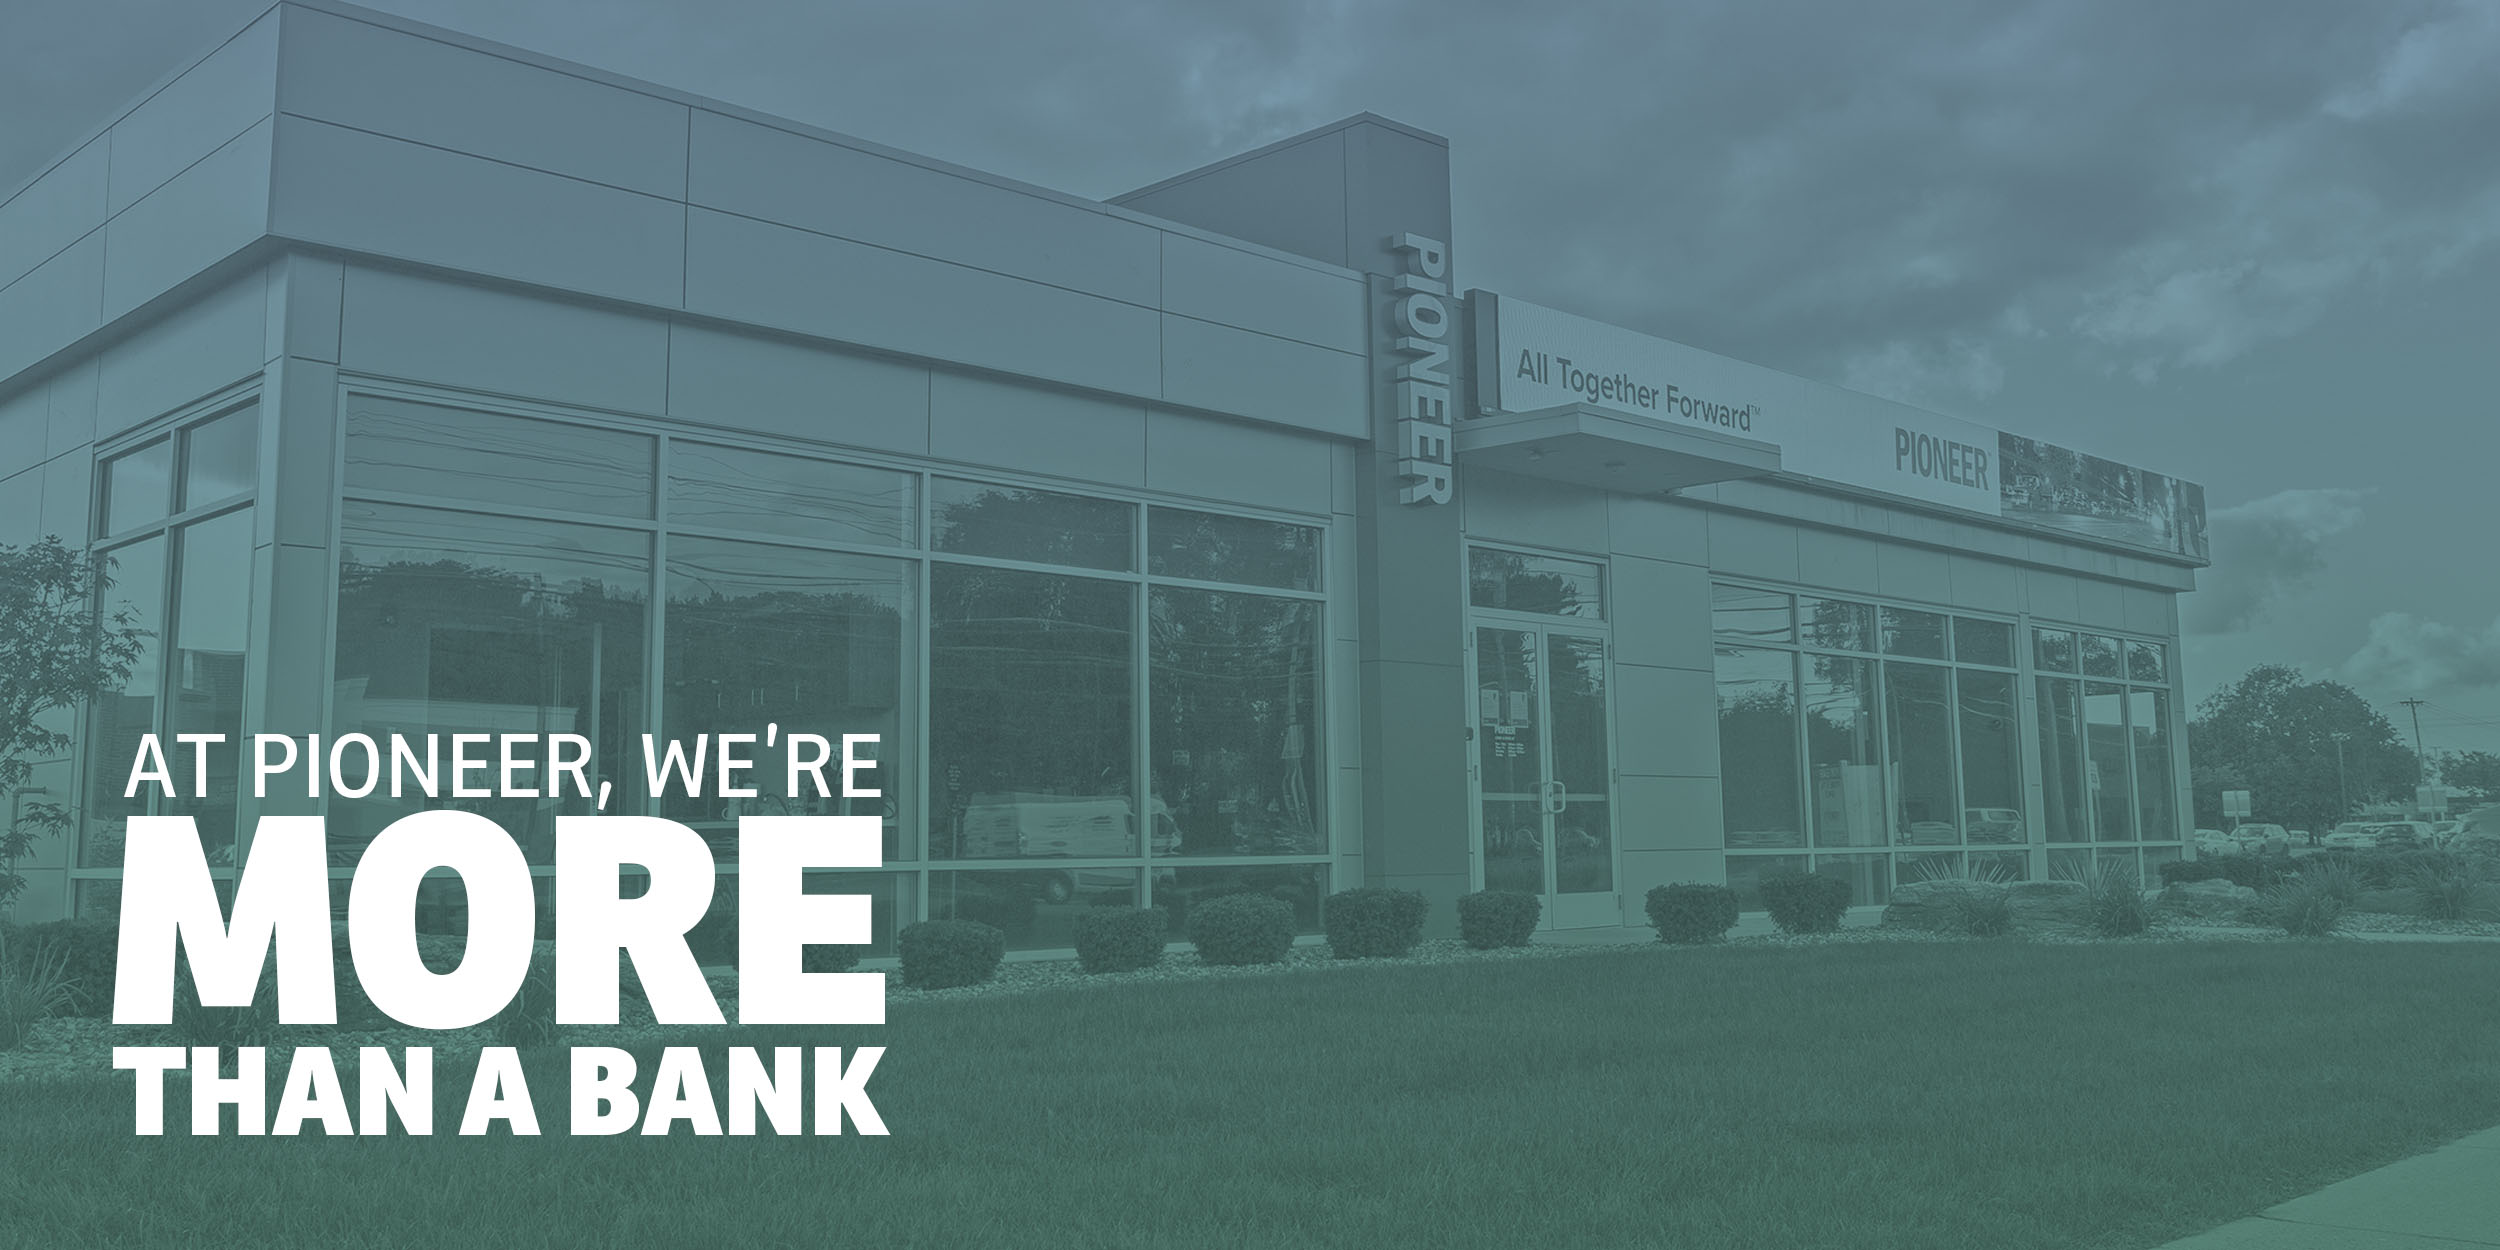 At Pioneer, We're More Than a Bank